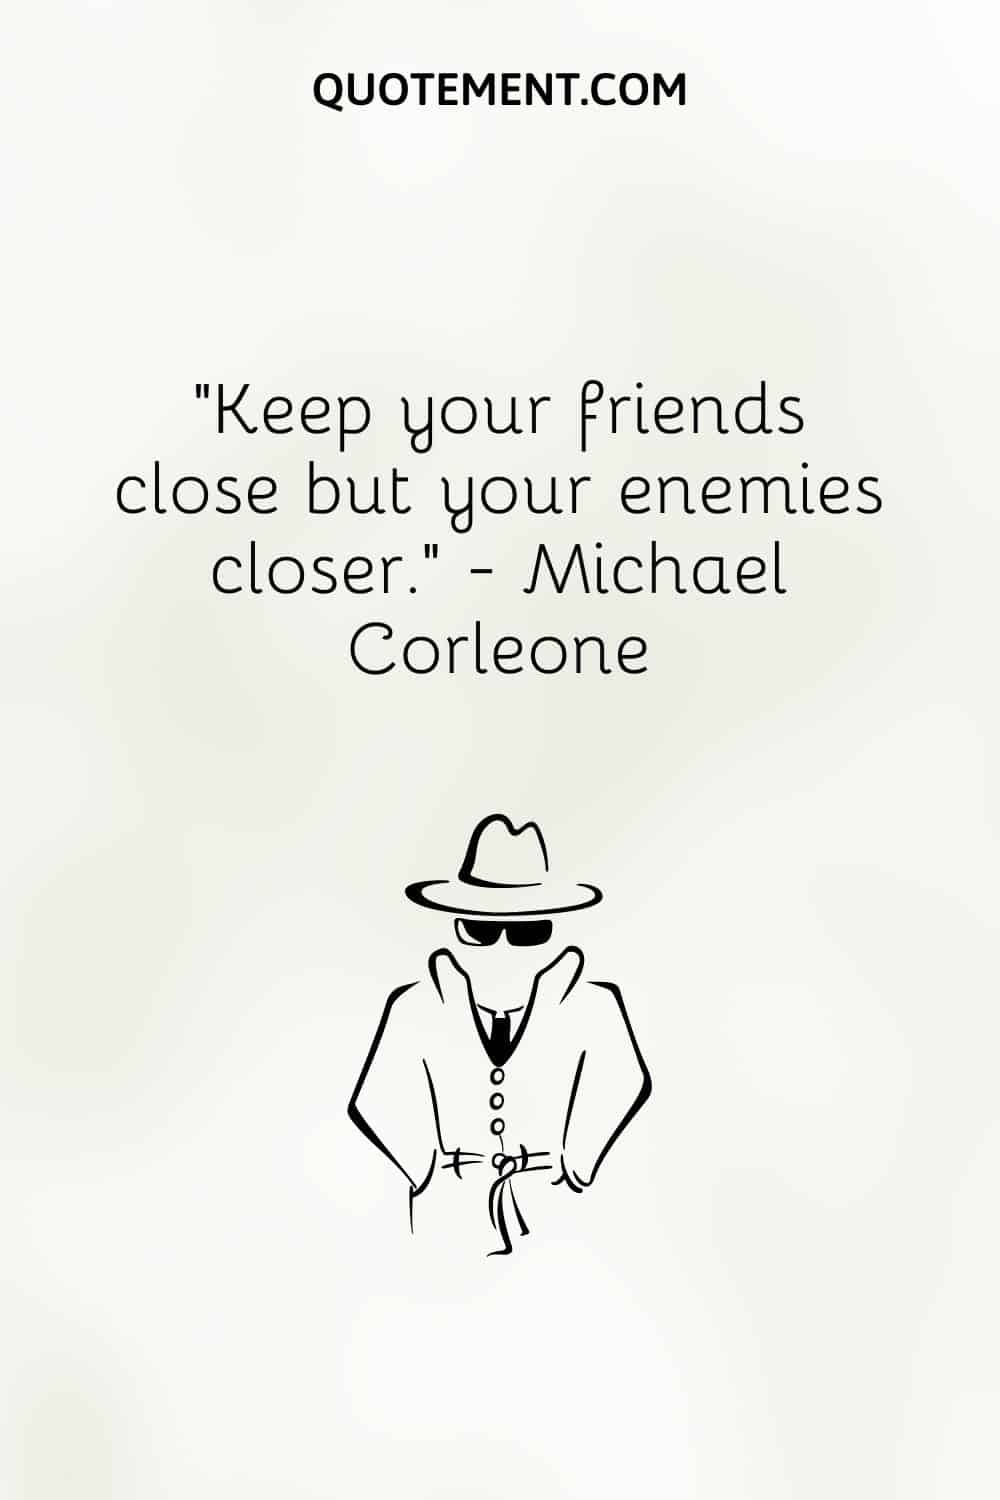 Keep your friends close